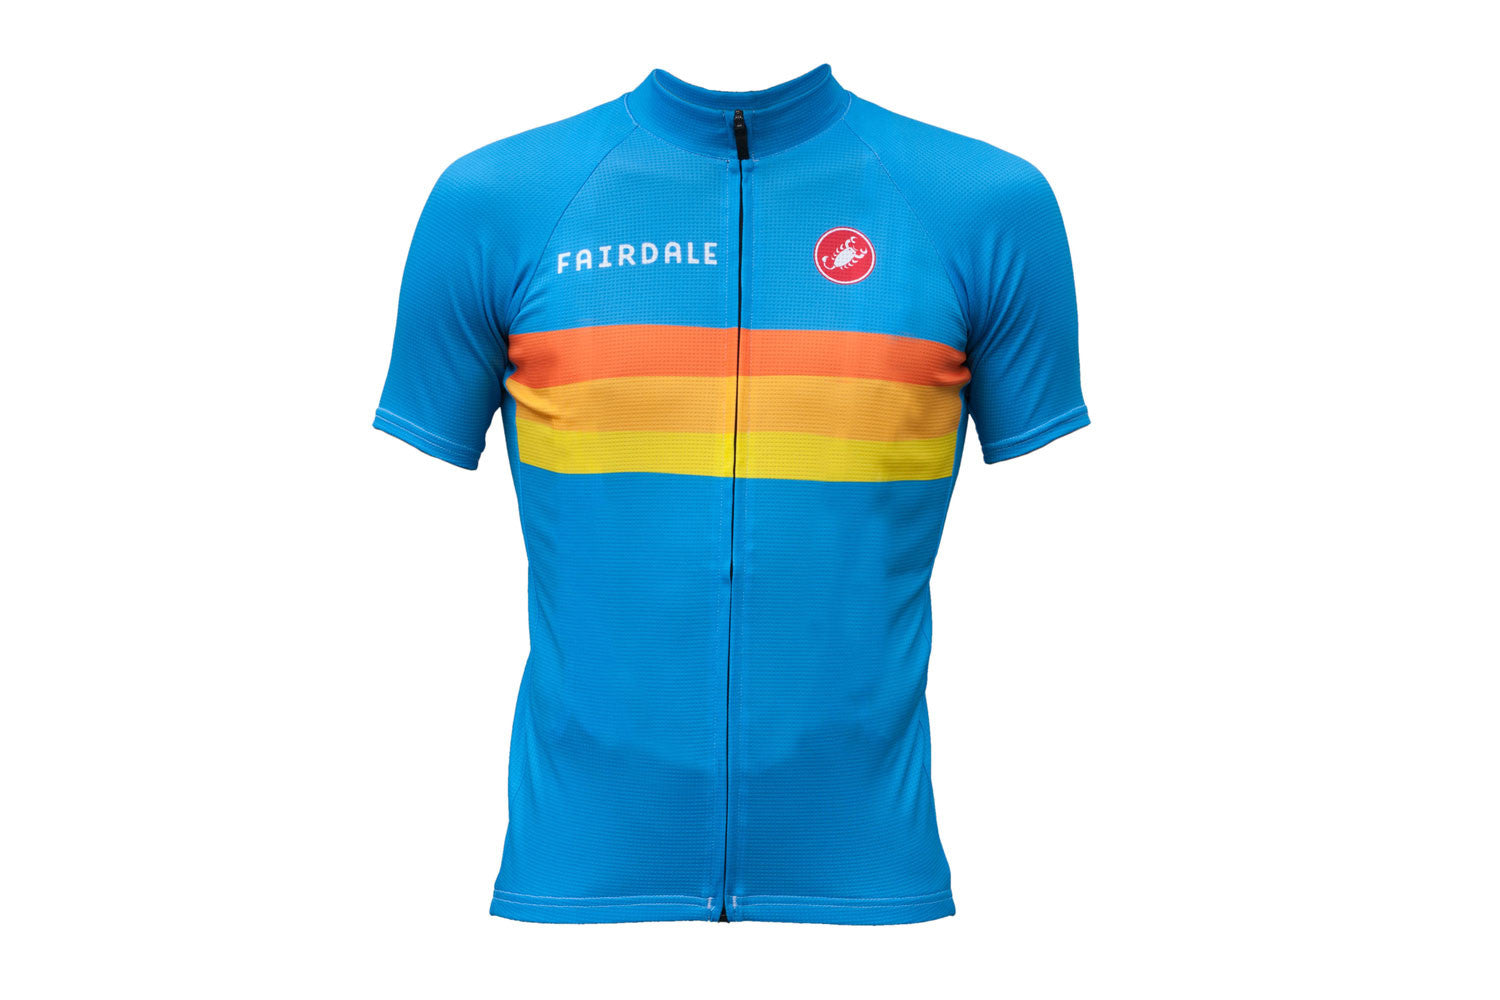 Fairdale Stripes Cycling Jersey (by Castelli) Fairdale Bikes